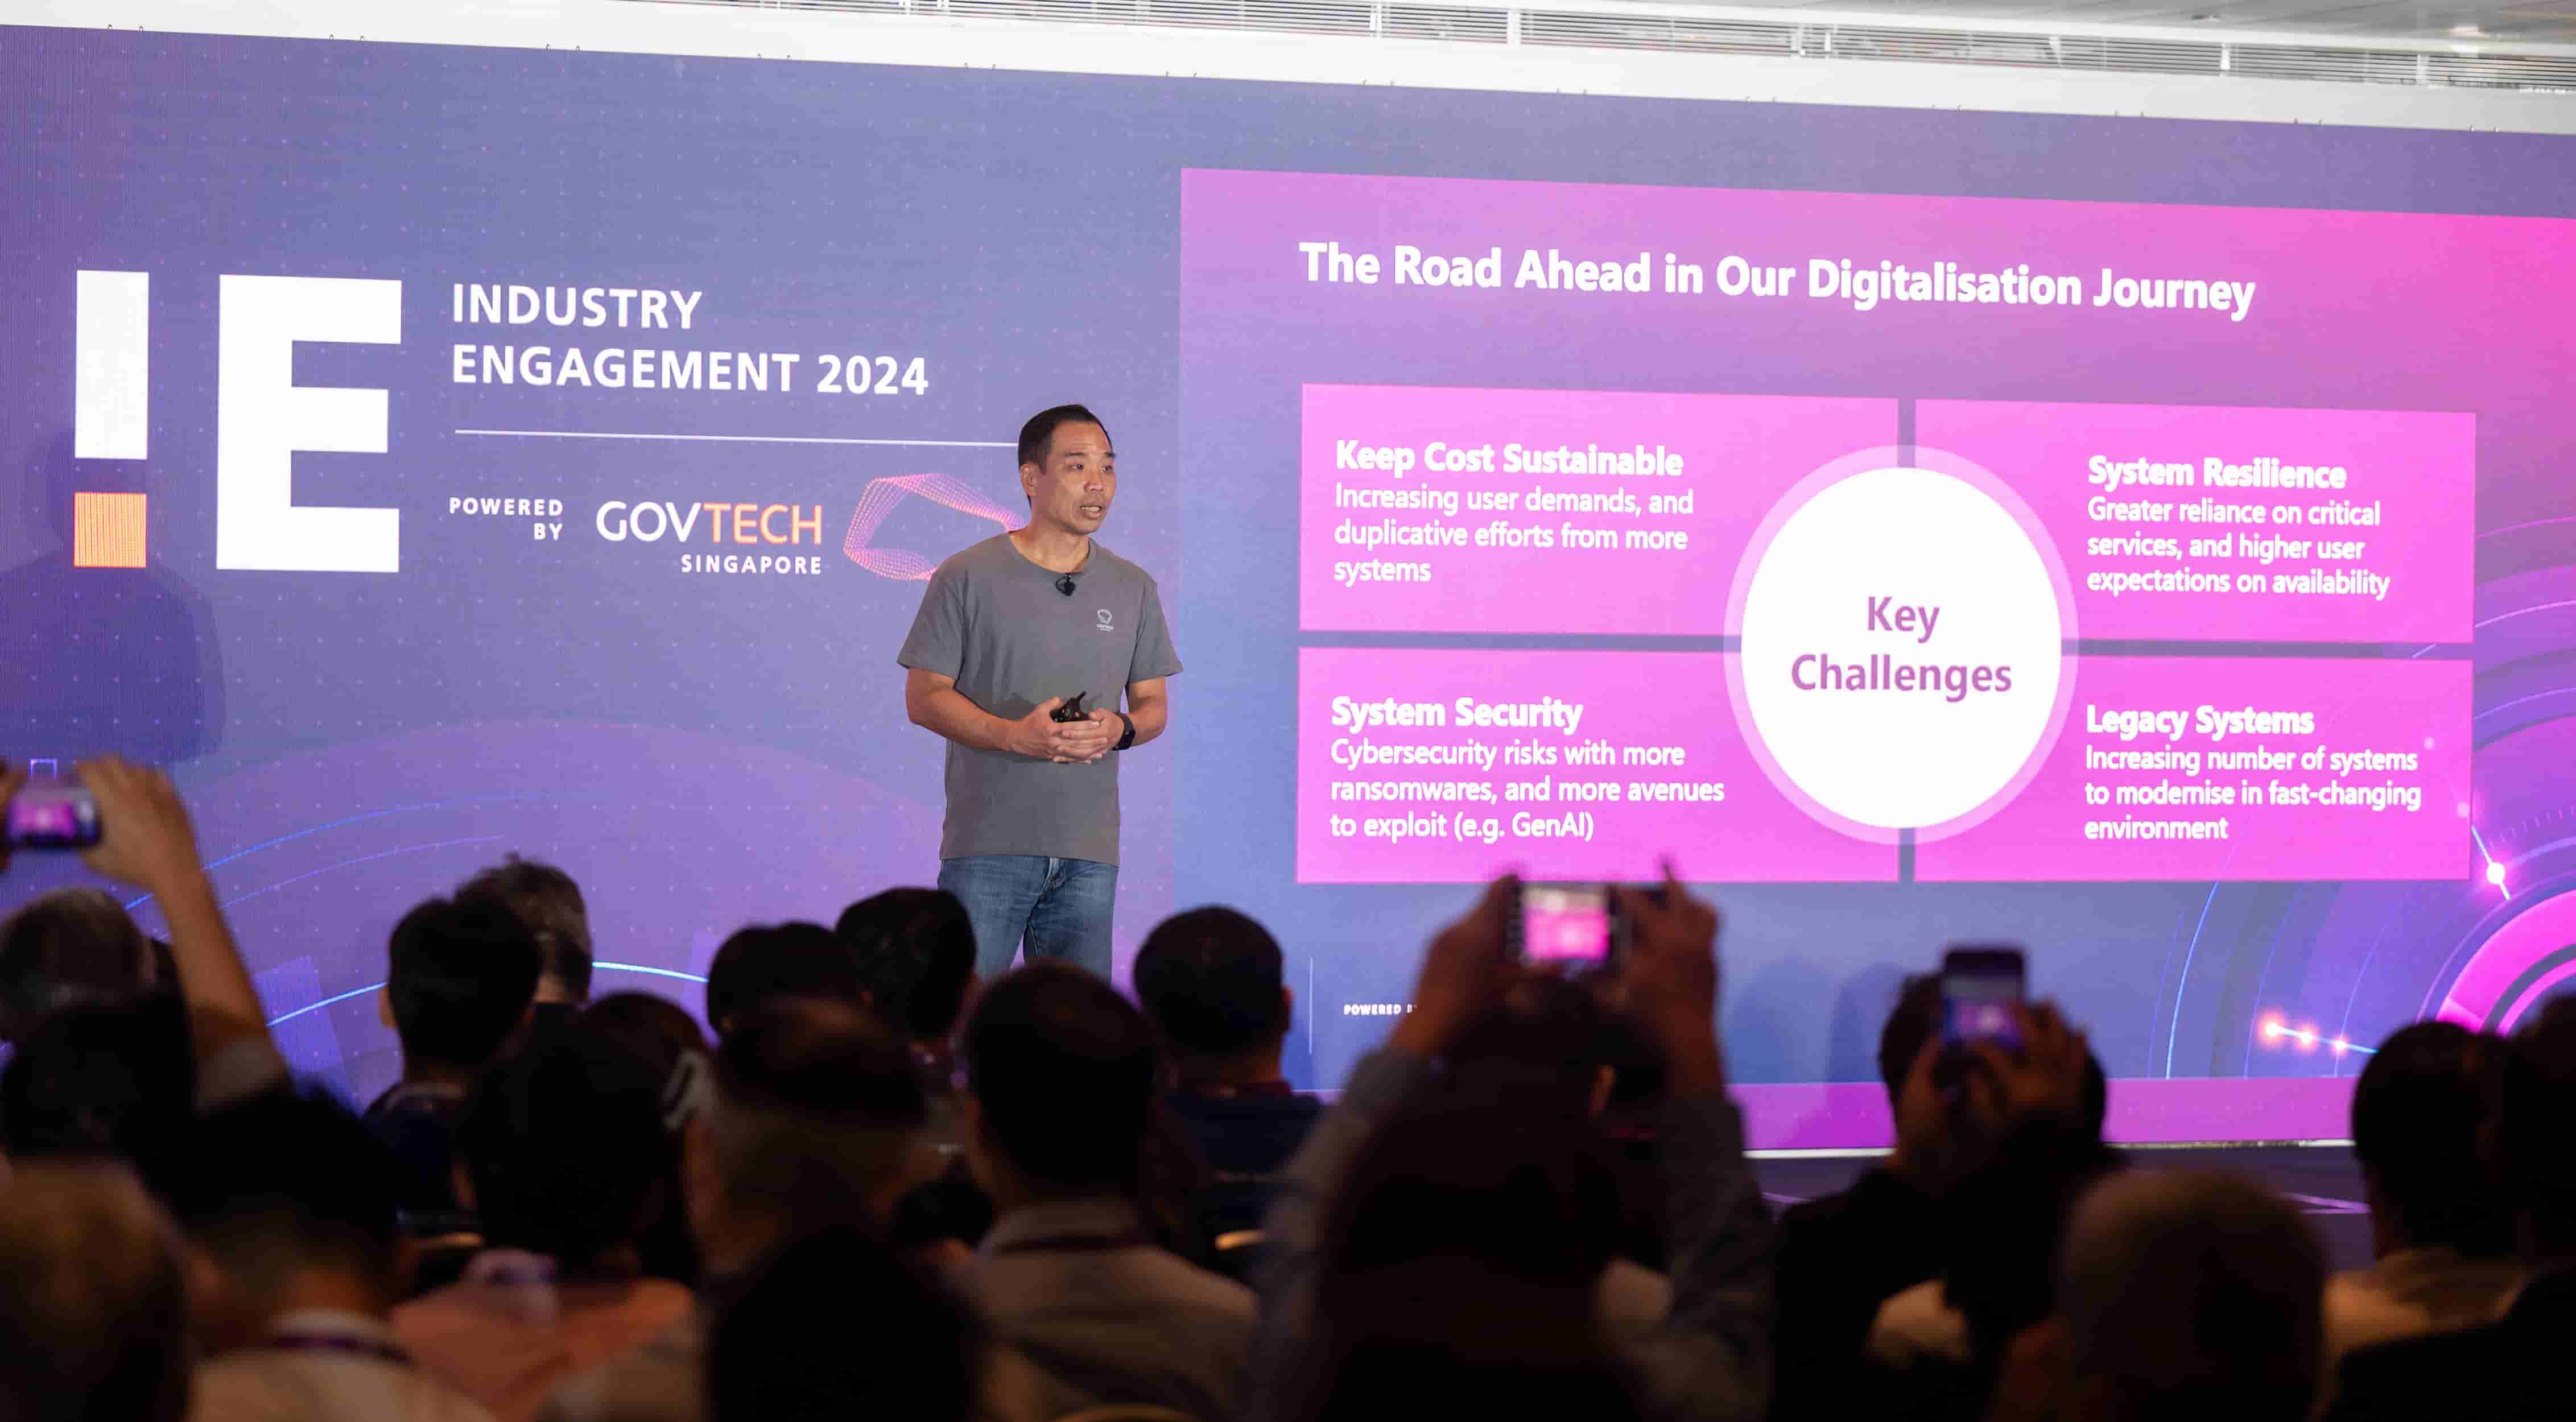 GovTech CEO Goh Wei Boon giving his opening address at Industry Engagement 2024